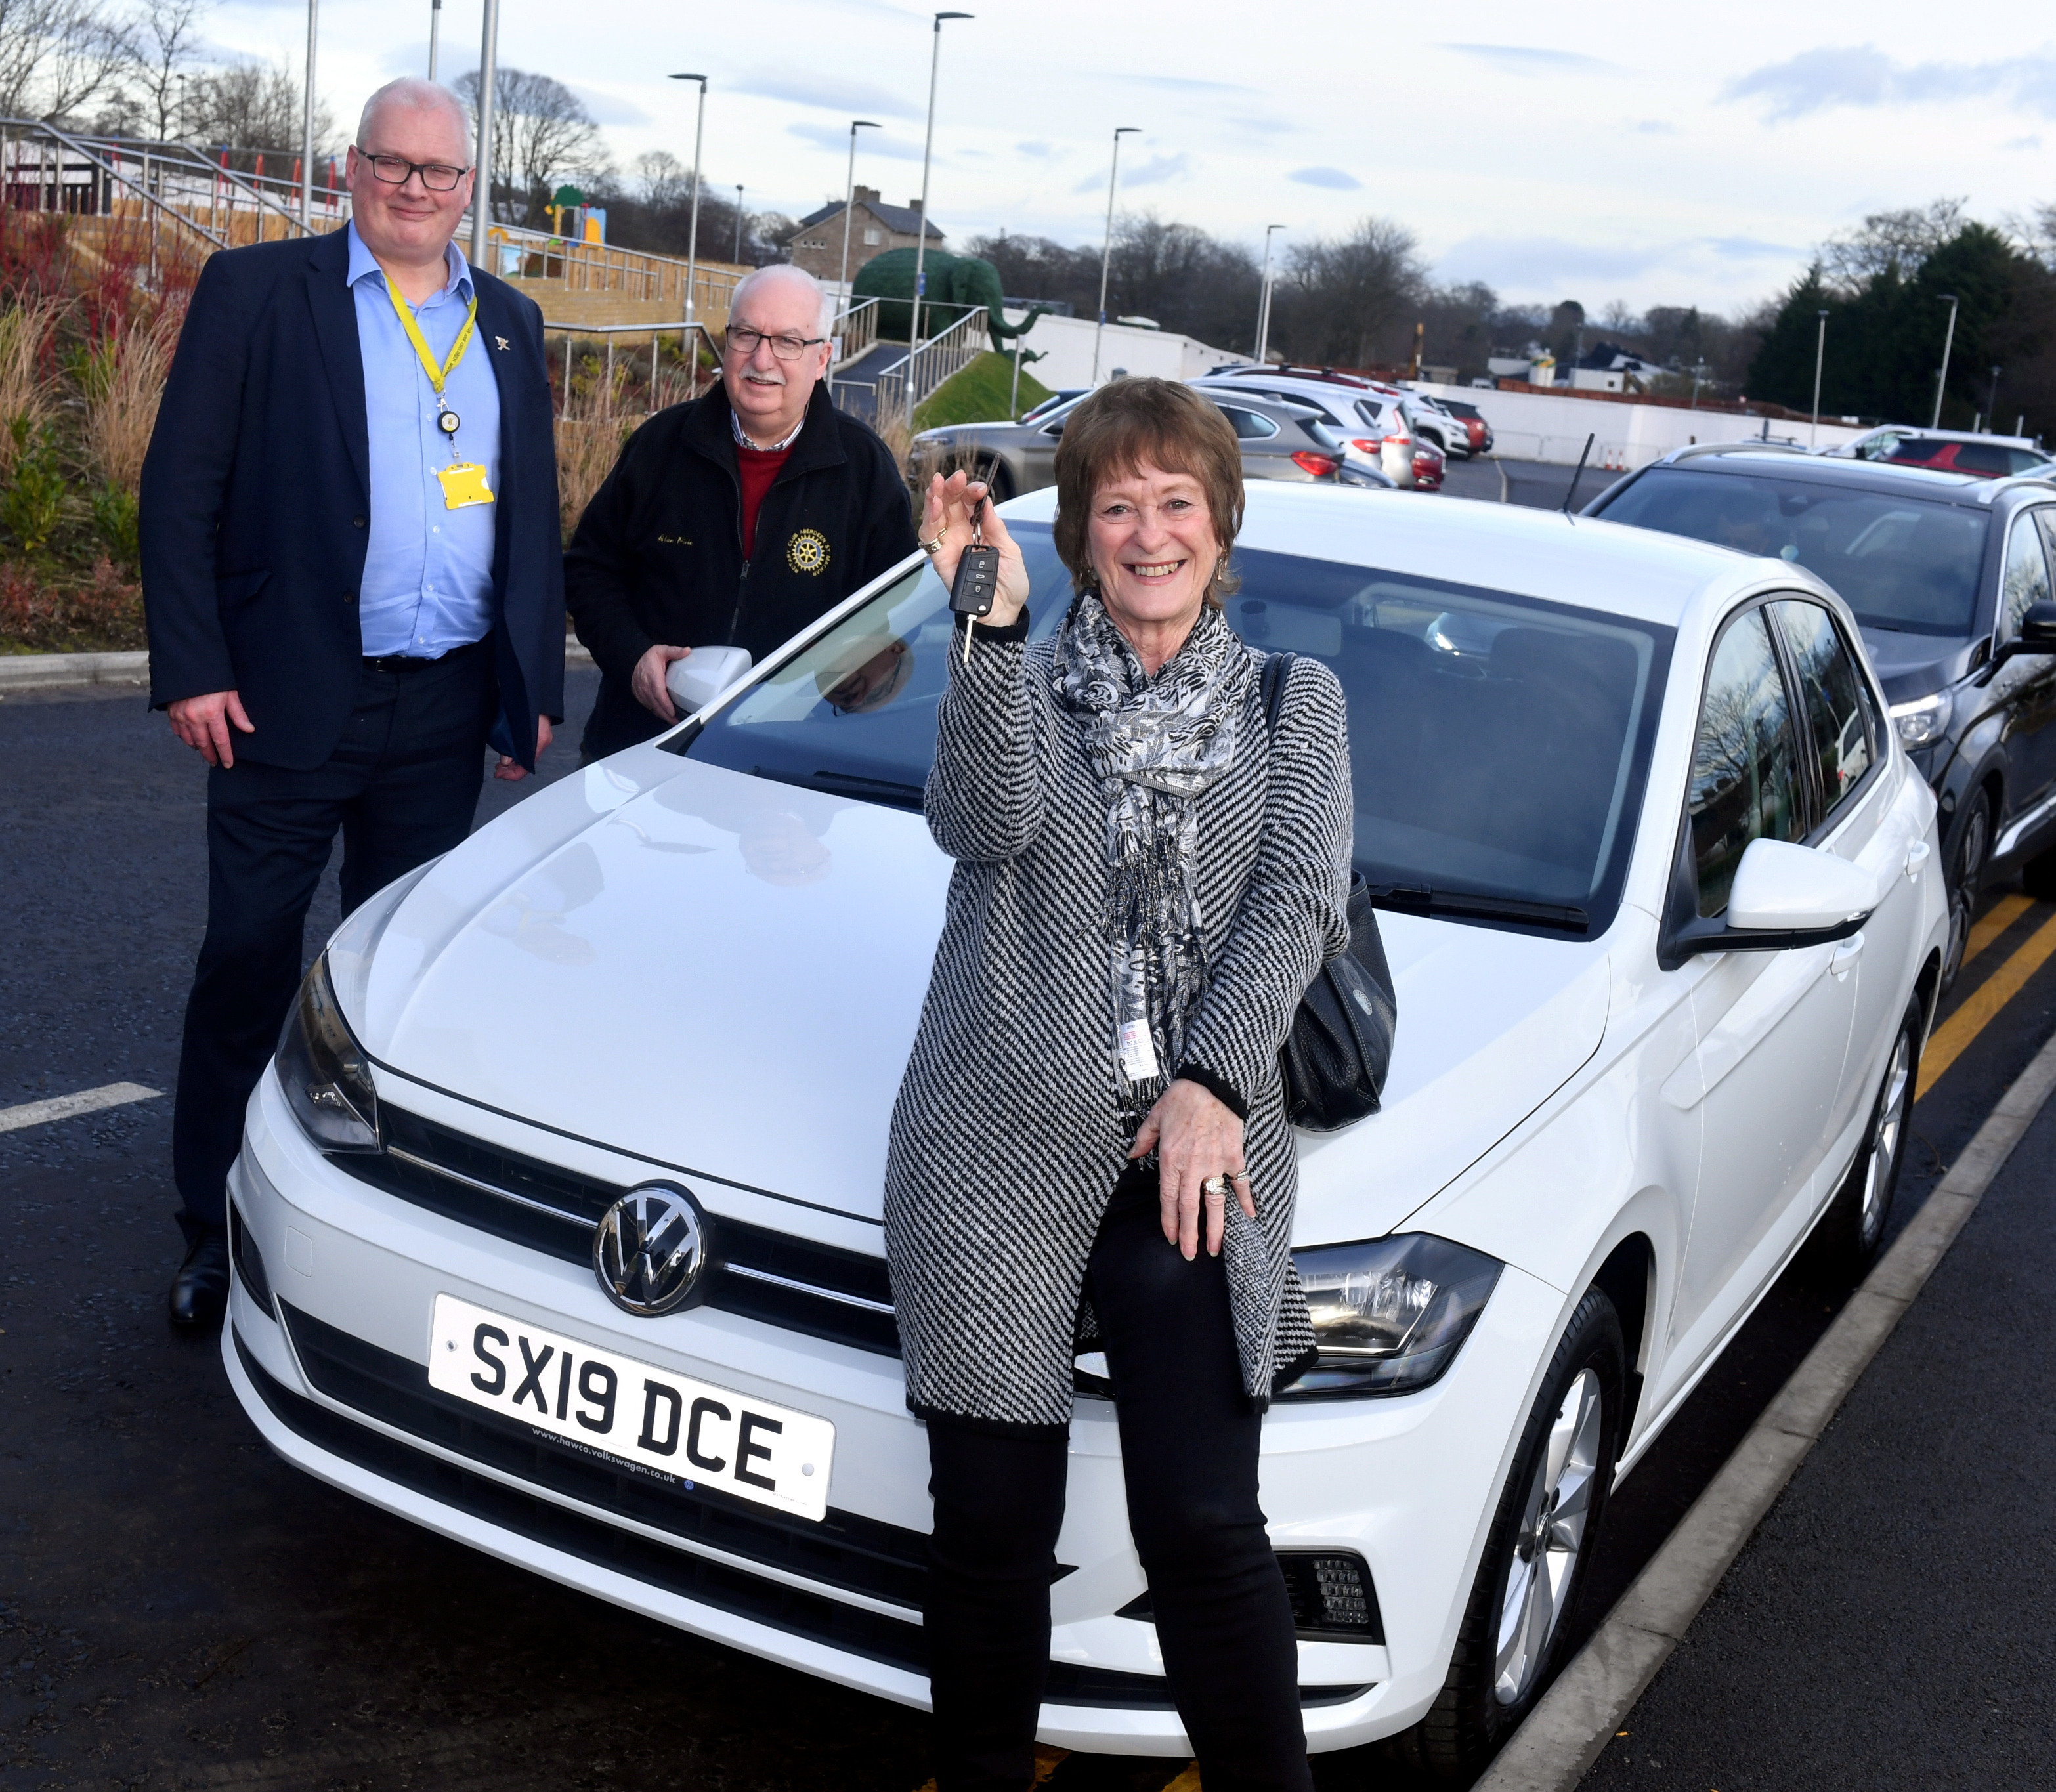 CR0018721
Pictured is Marilyn Fraser, the winner of the The ARCHIE Foundation annual car raffle at Royal Aberdeen Children's Hospital.
Pictured with Marilyn Fraser are from left, David Wood CEO of ARCHIE and Alan Pirie Chairman of Aberdeen Rotary's car raffle committee.
Pic by...............Chris Sumner
Taken...............24/1/2020